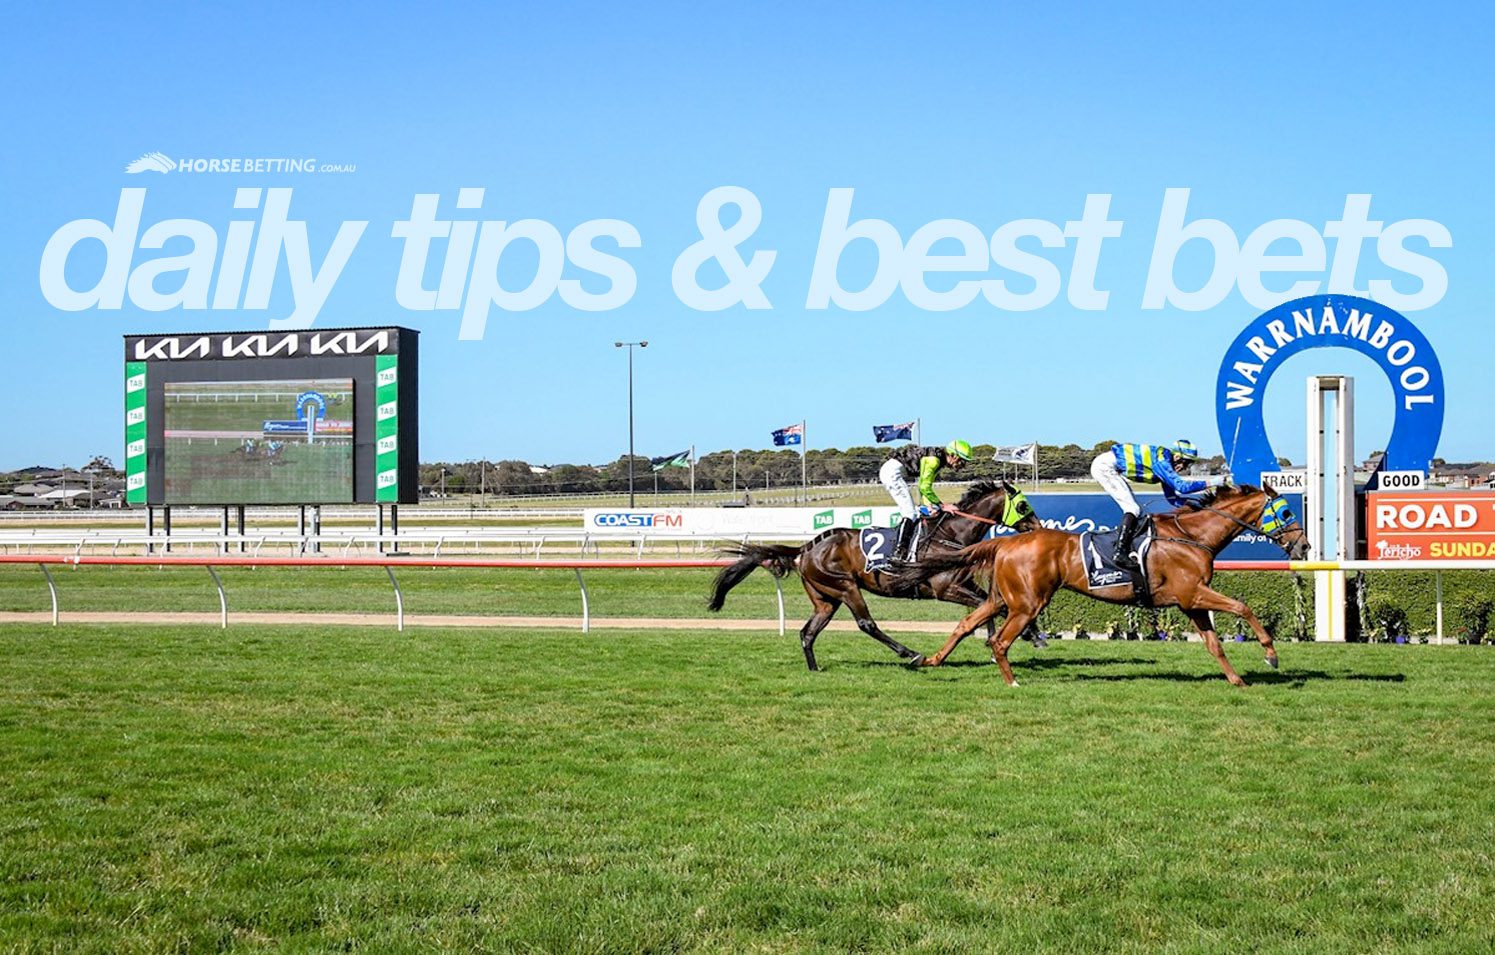 Monday horse racing tips & best bets